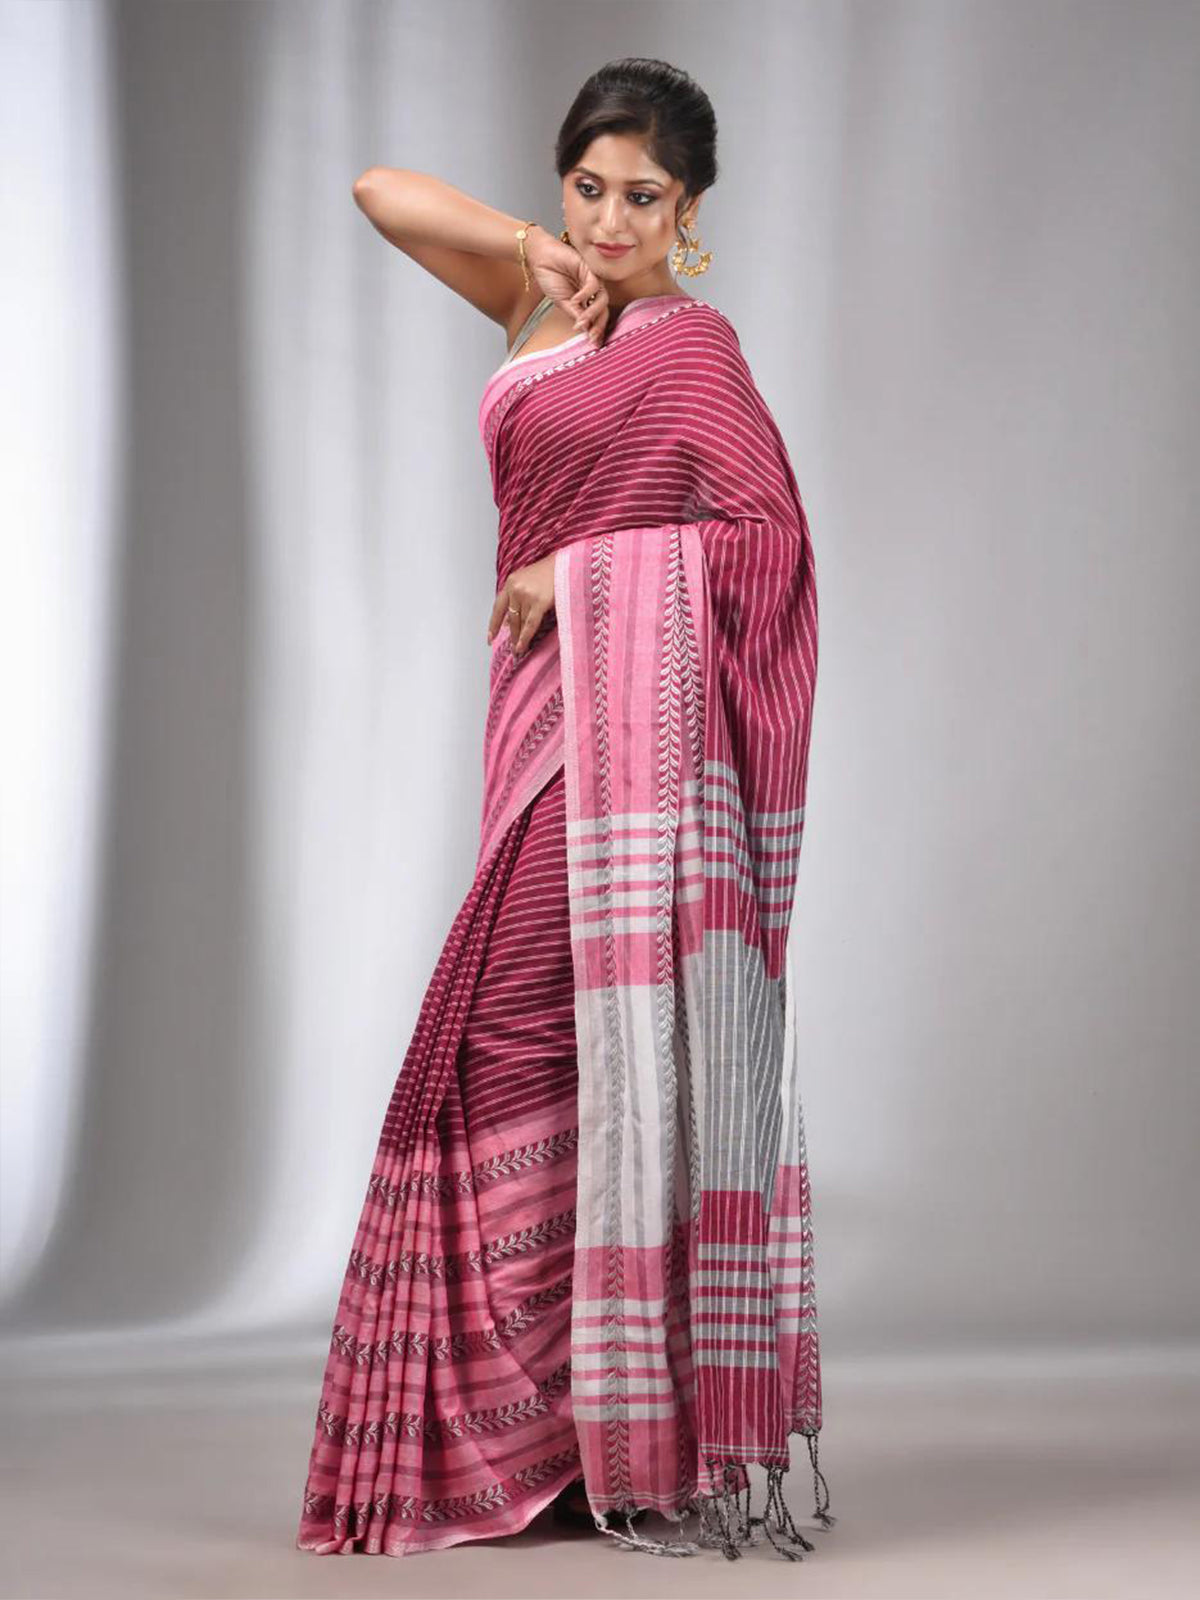 Odette Dark Pink Cotton Saree With Unstitched Blouse For Women